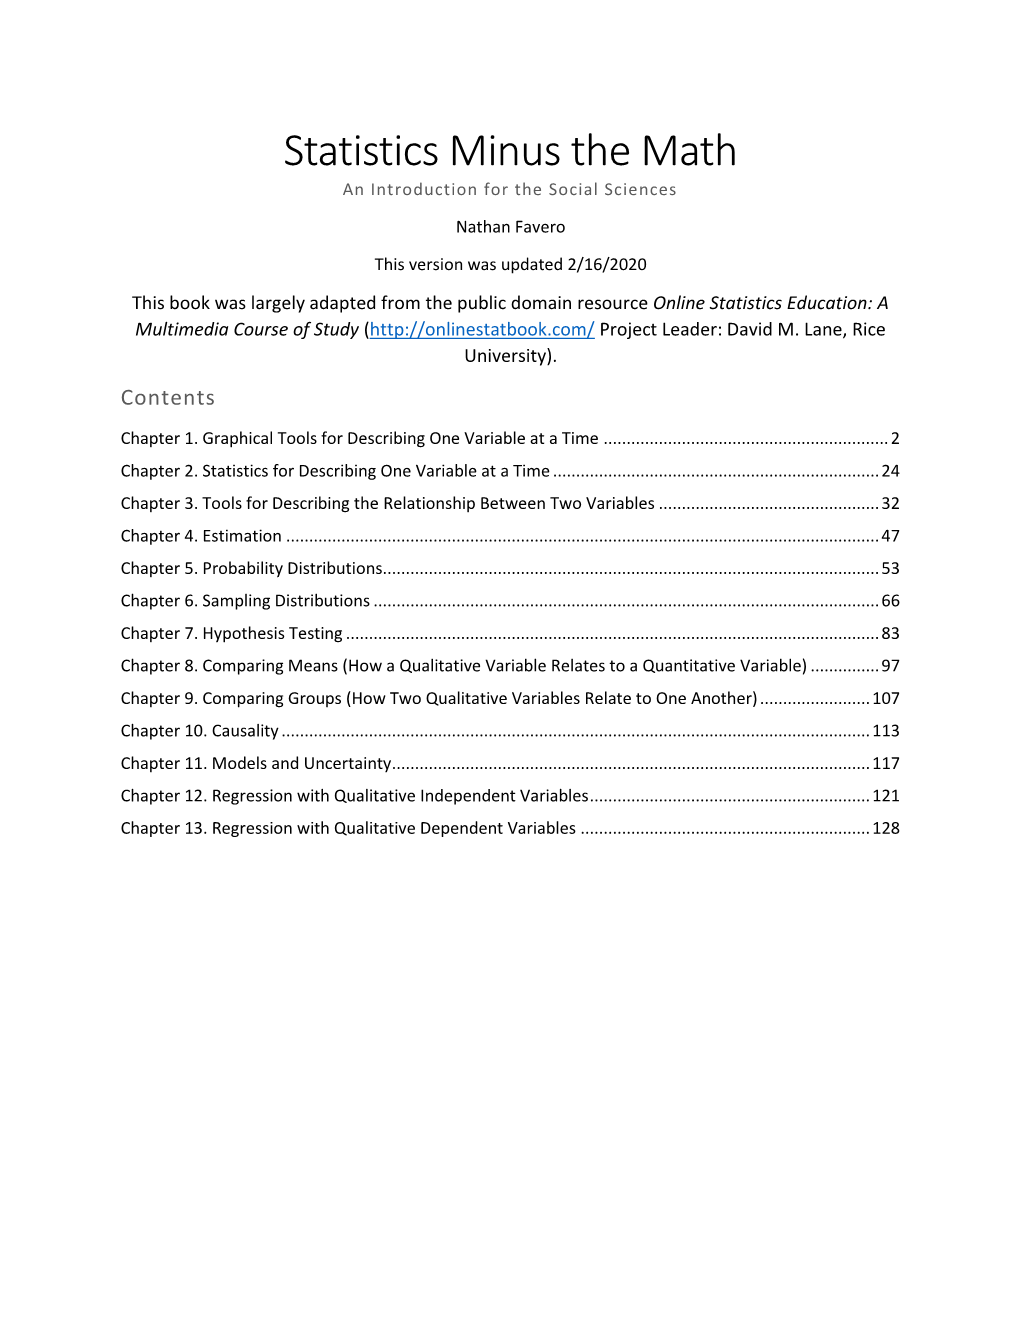 Statistics Minus the Math an Introduction for the Social Sciences